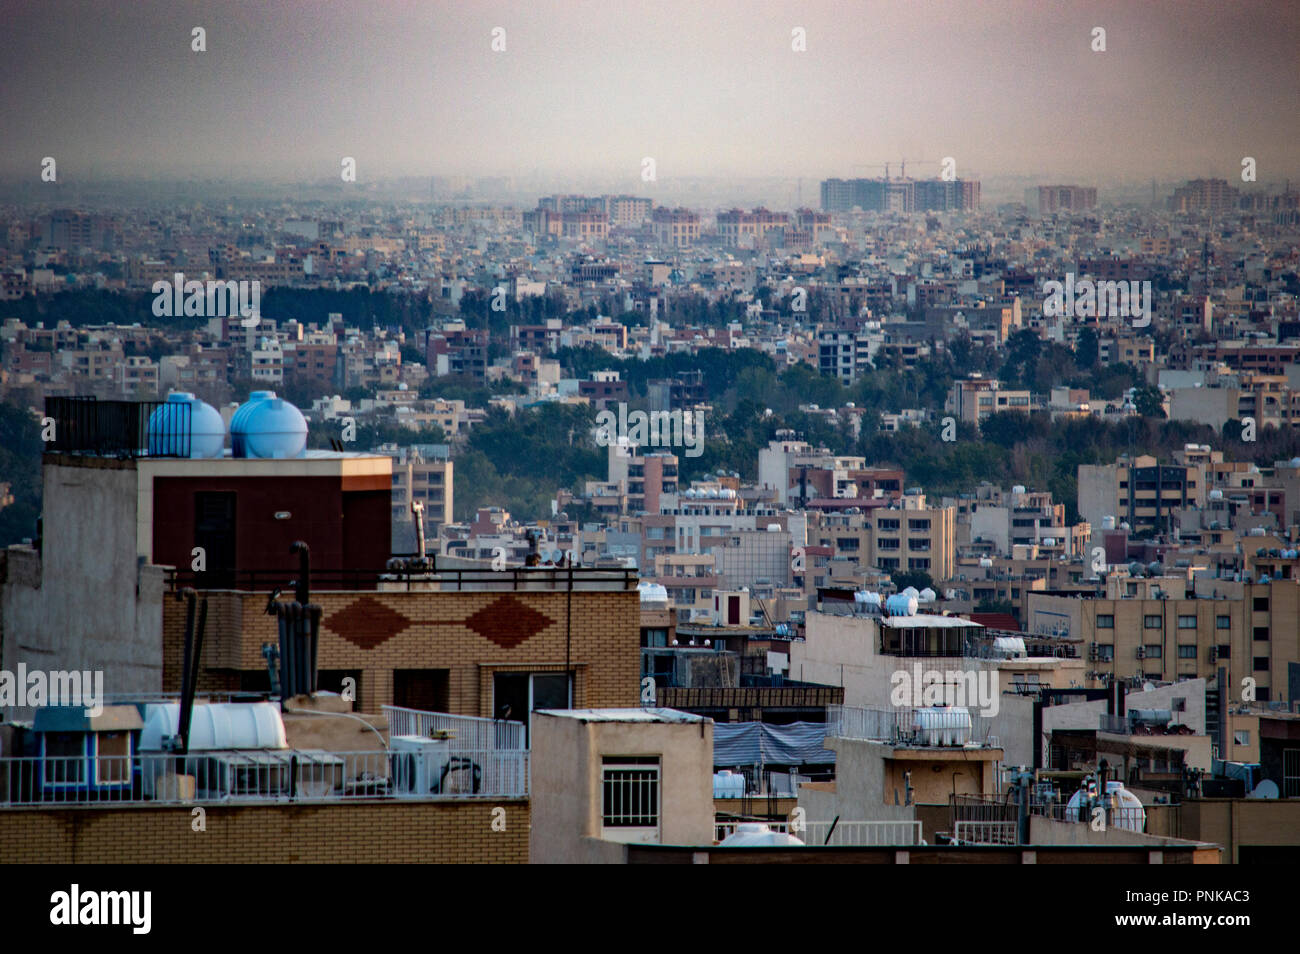 A view of Esfahan, Iran Stock Photo